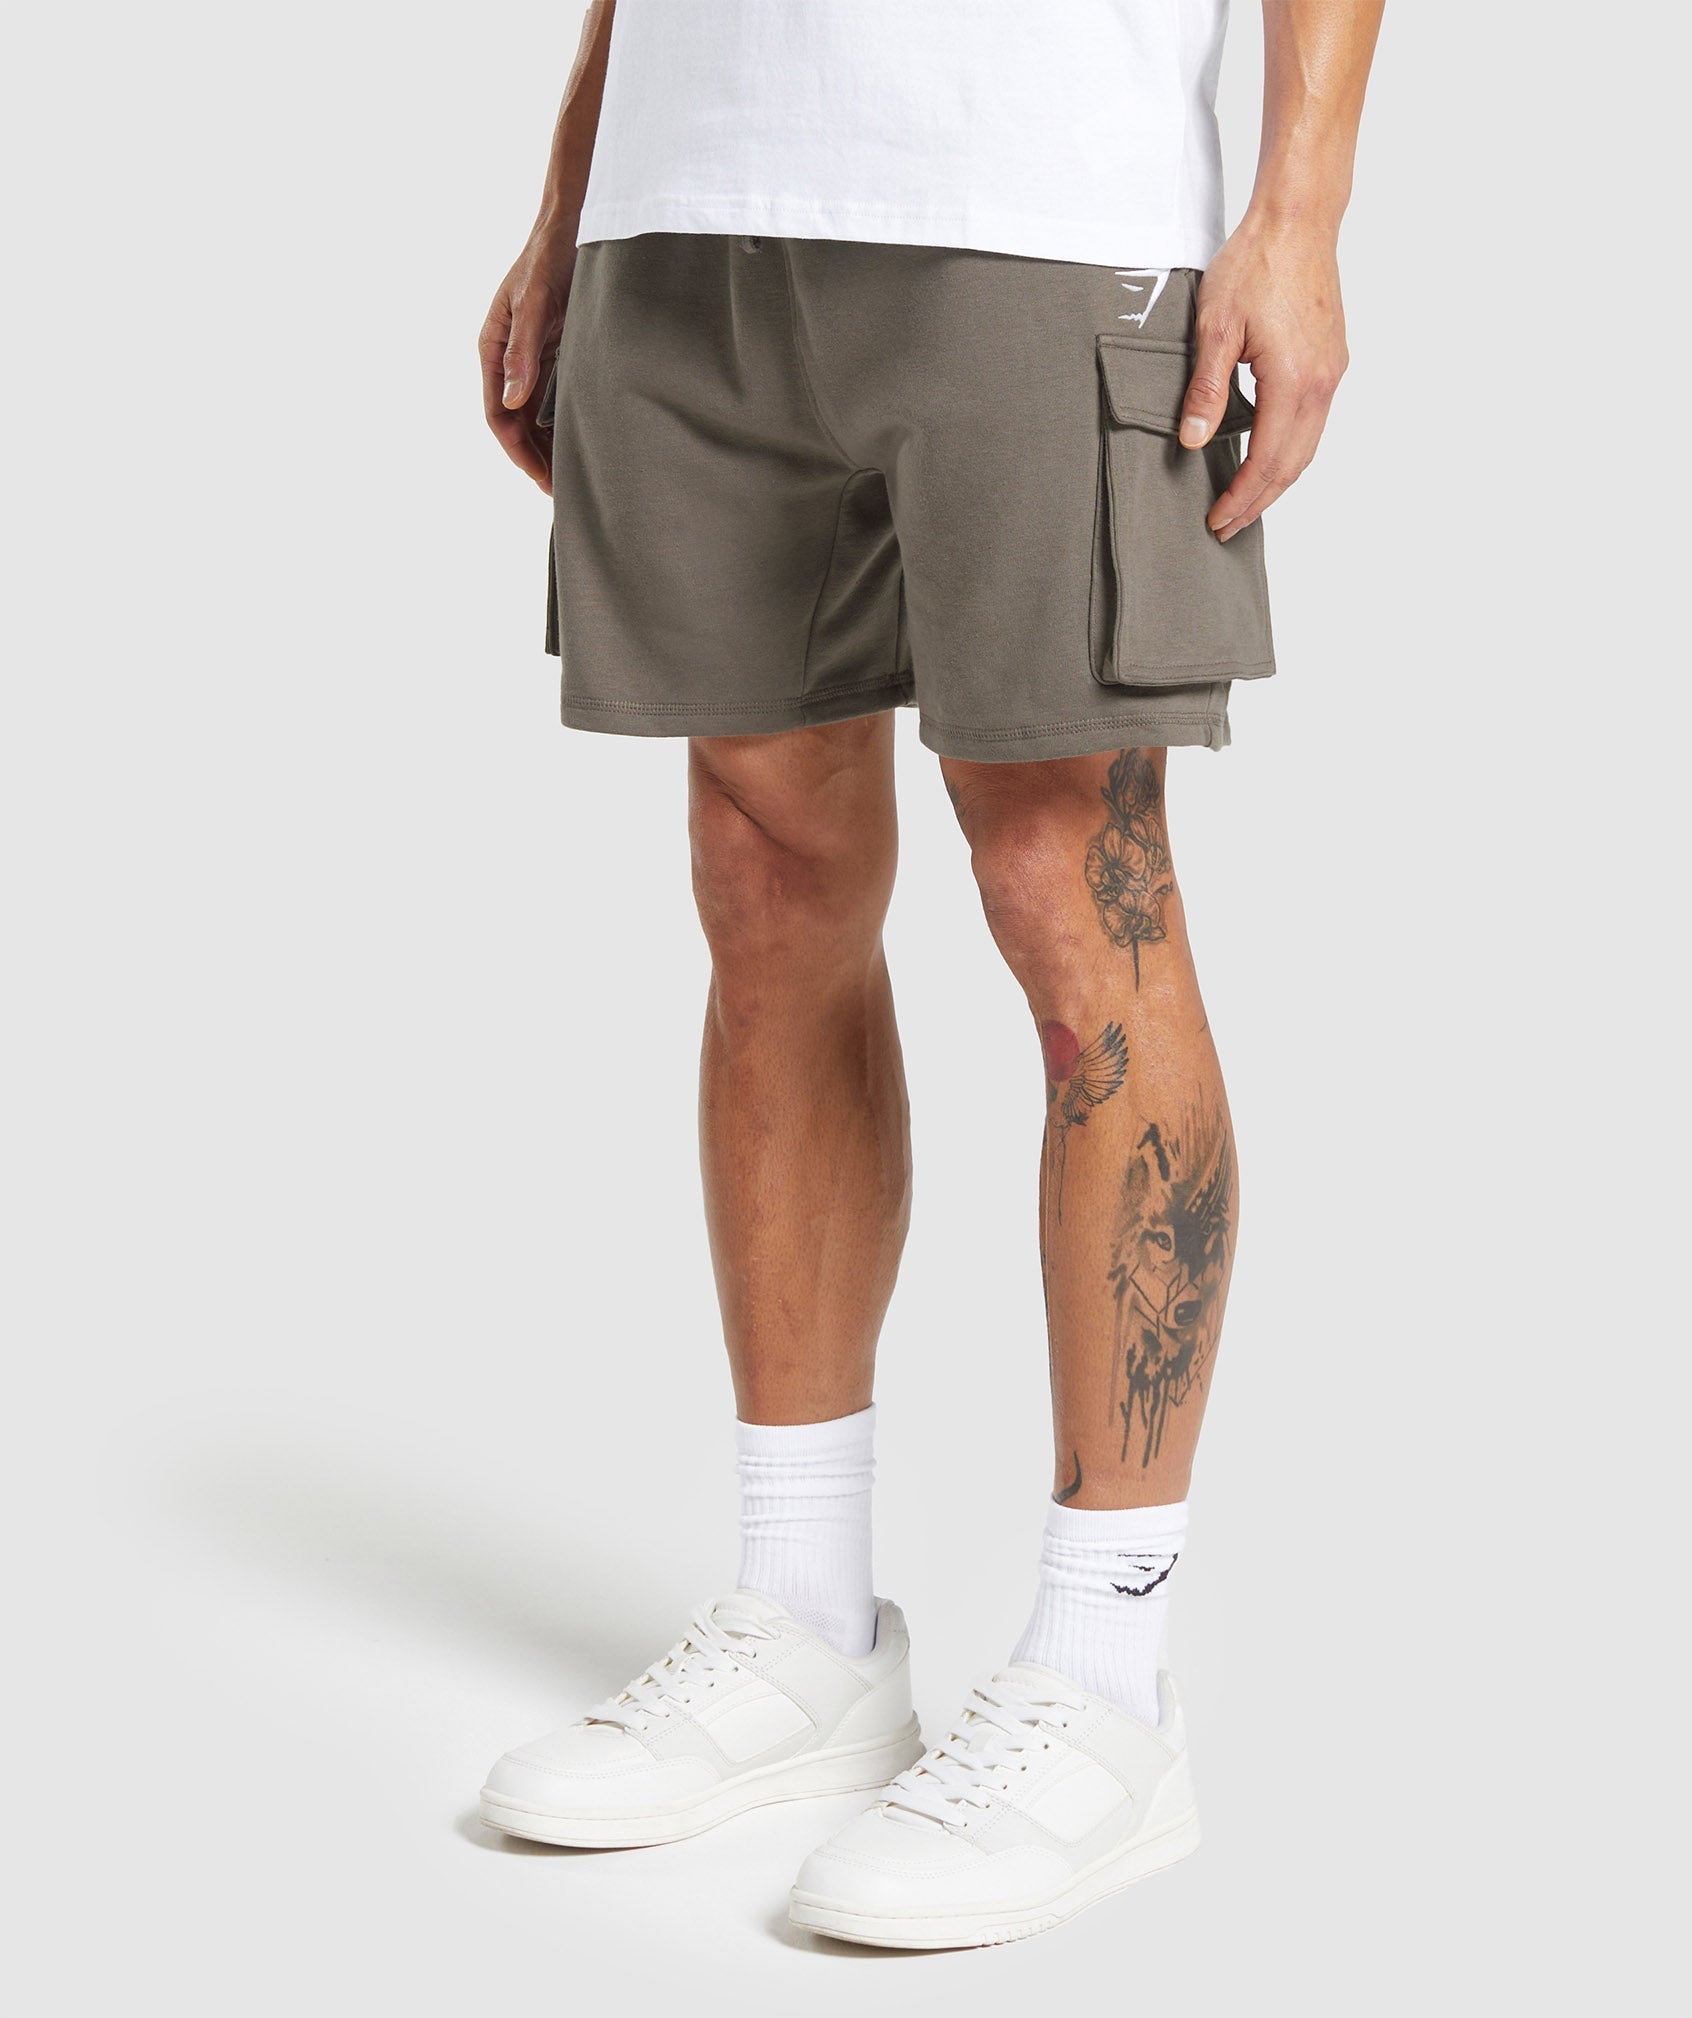 Crest Cargo Shorts in Camo Brown - view 3